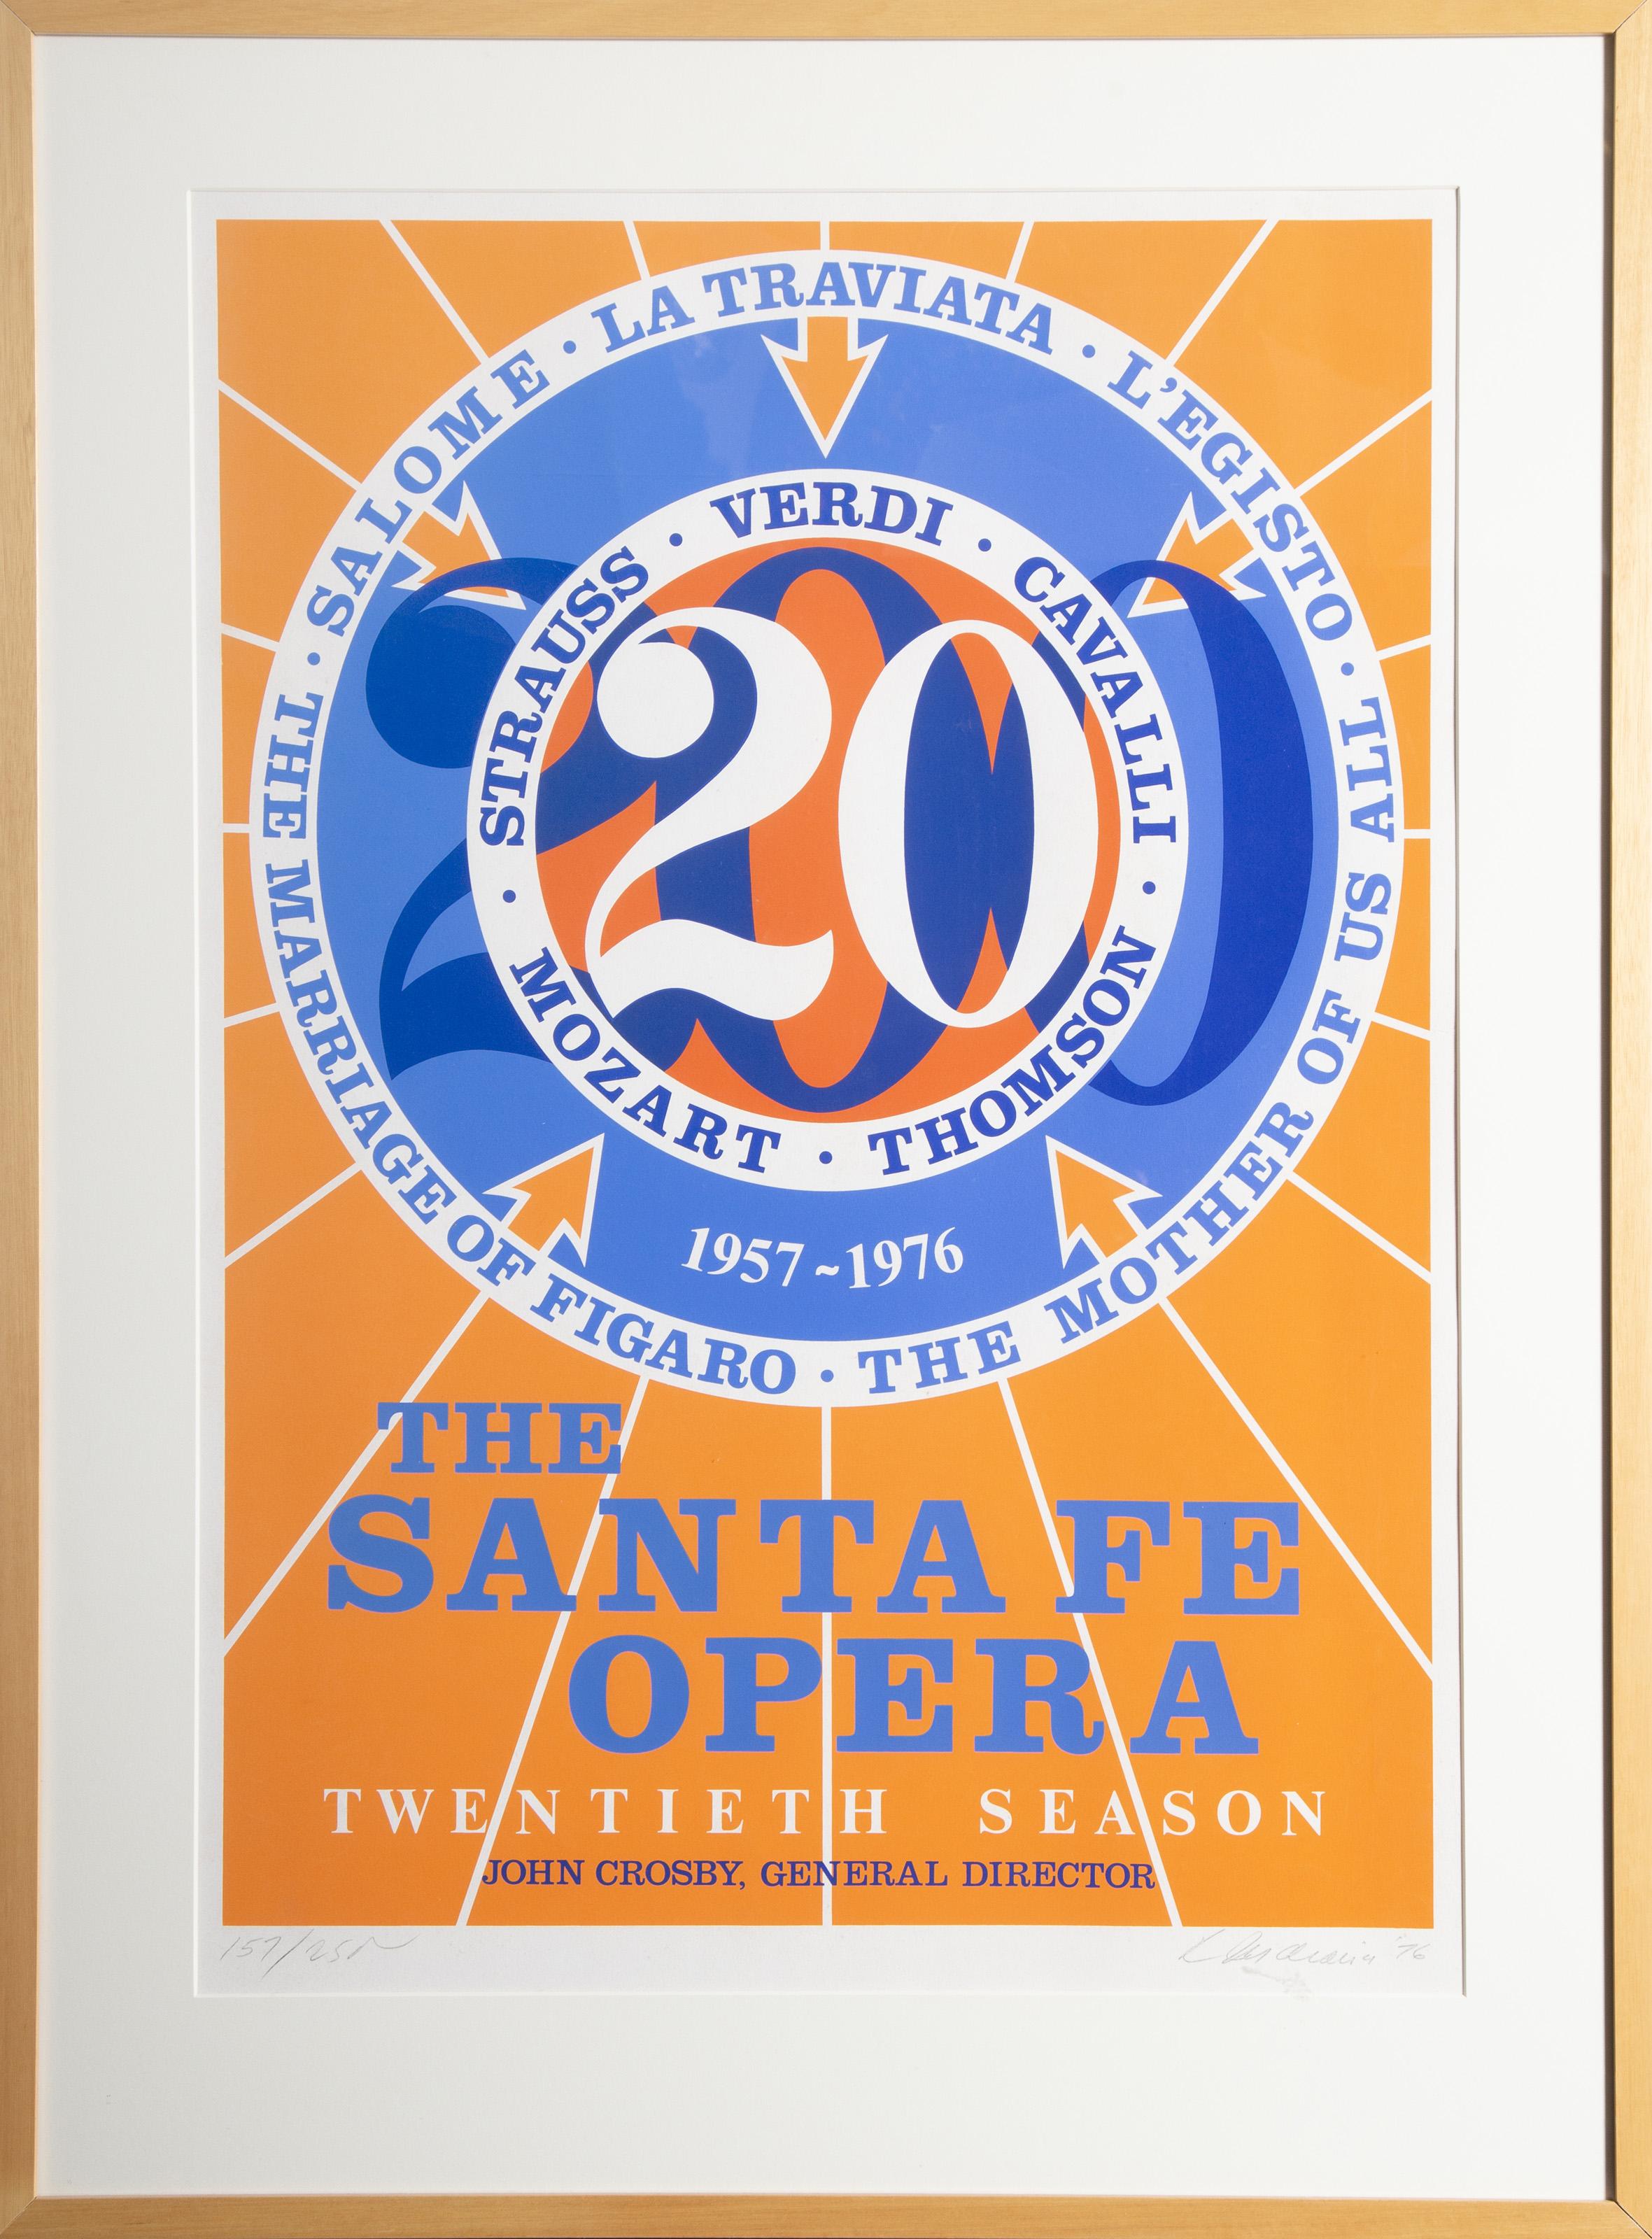 Sante Fe Opera
Robert Indiana, American (1928–2018)
Date: 1976
Screenprint, signed, dated and numbered in pencil
Edition of 157/250
Size: 31 x 22 in. (78.74 x 55.88 cm)
Frame Size: 40.5 x 30 inches